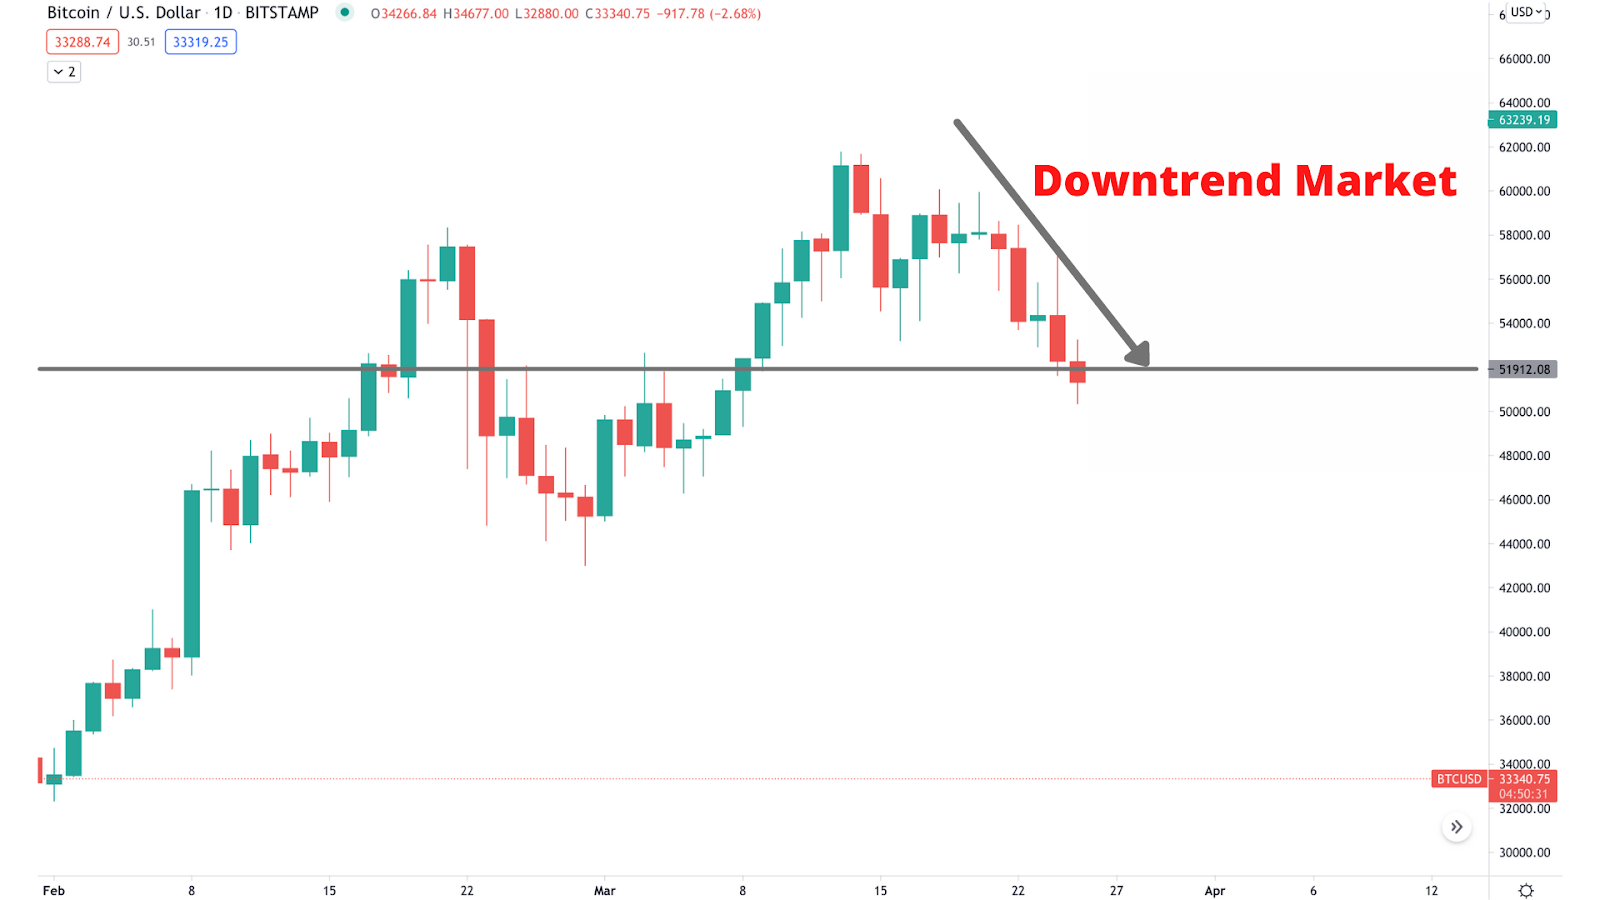 Downtrend Market